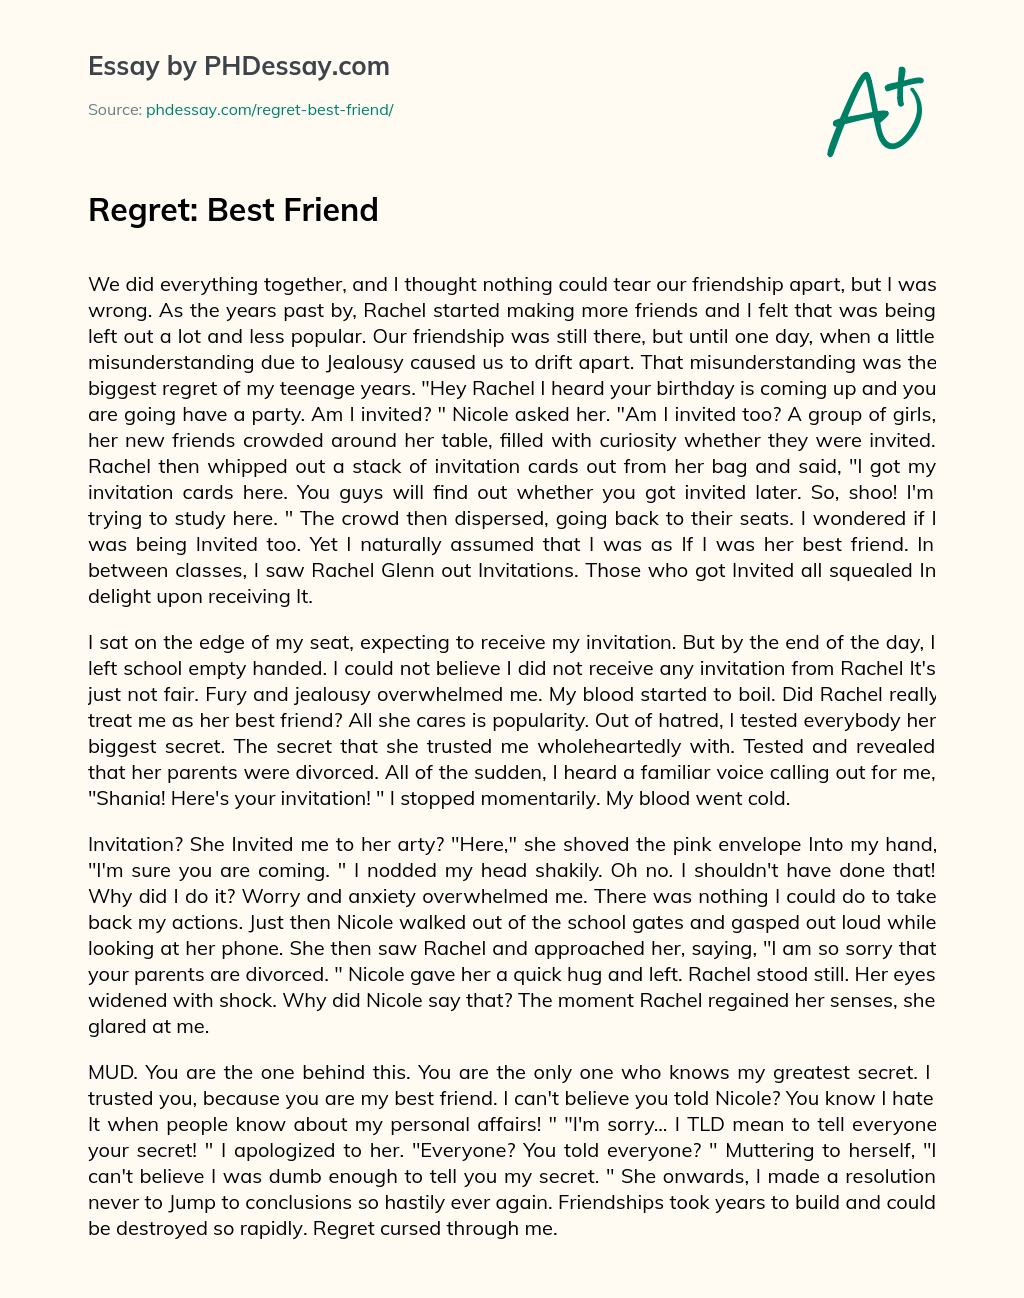 essay about losing a best friend